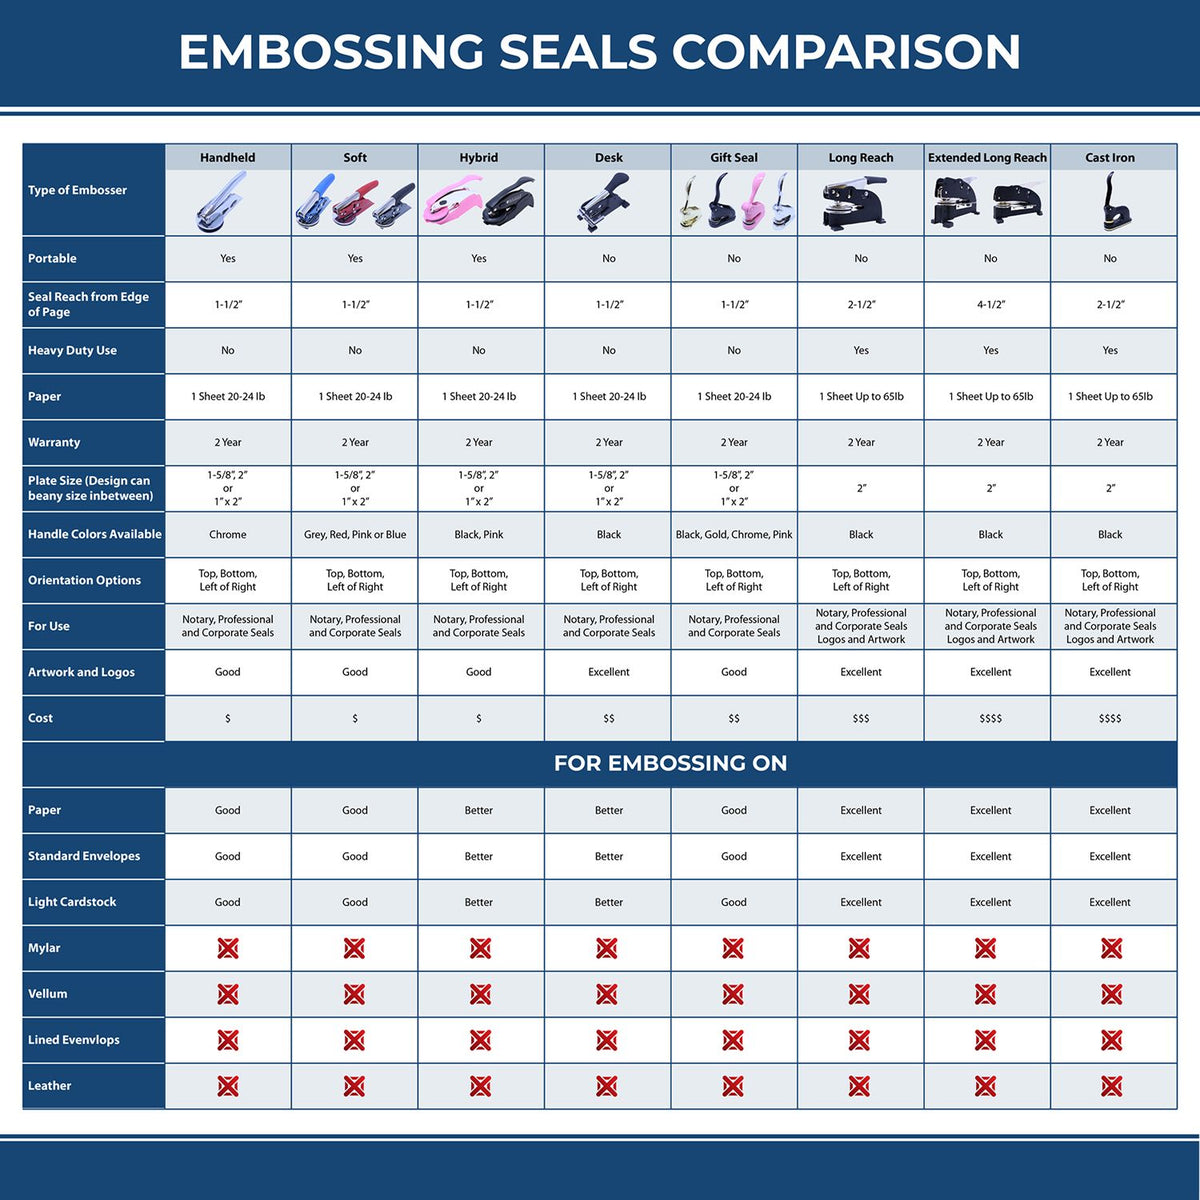 A comparison chart for the different types of mount models available for the Handheld Florida Architect Seal Embosser.